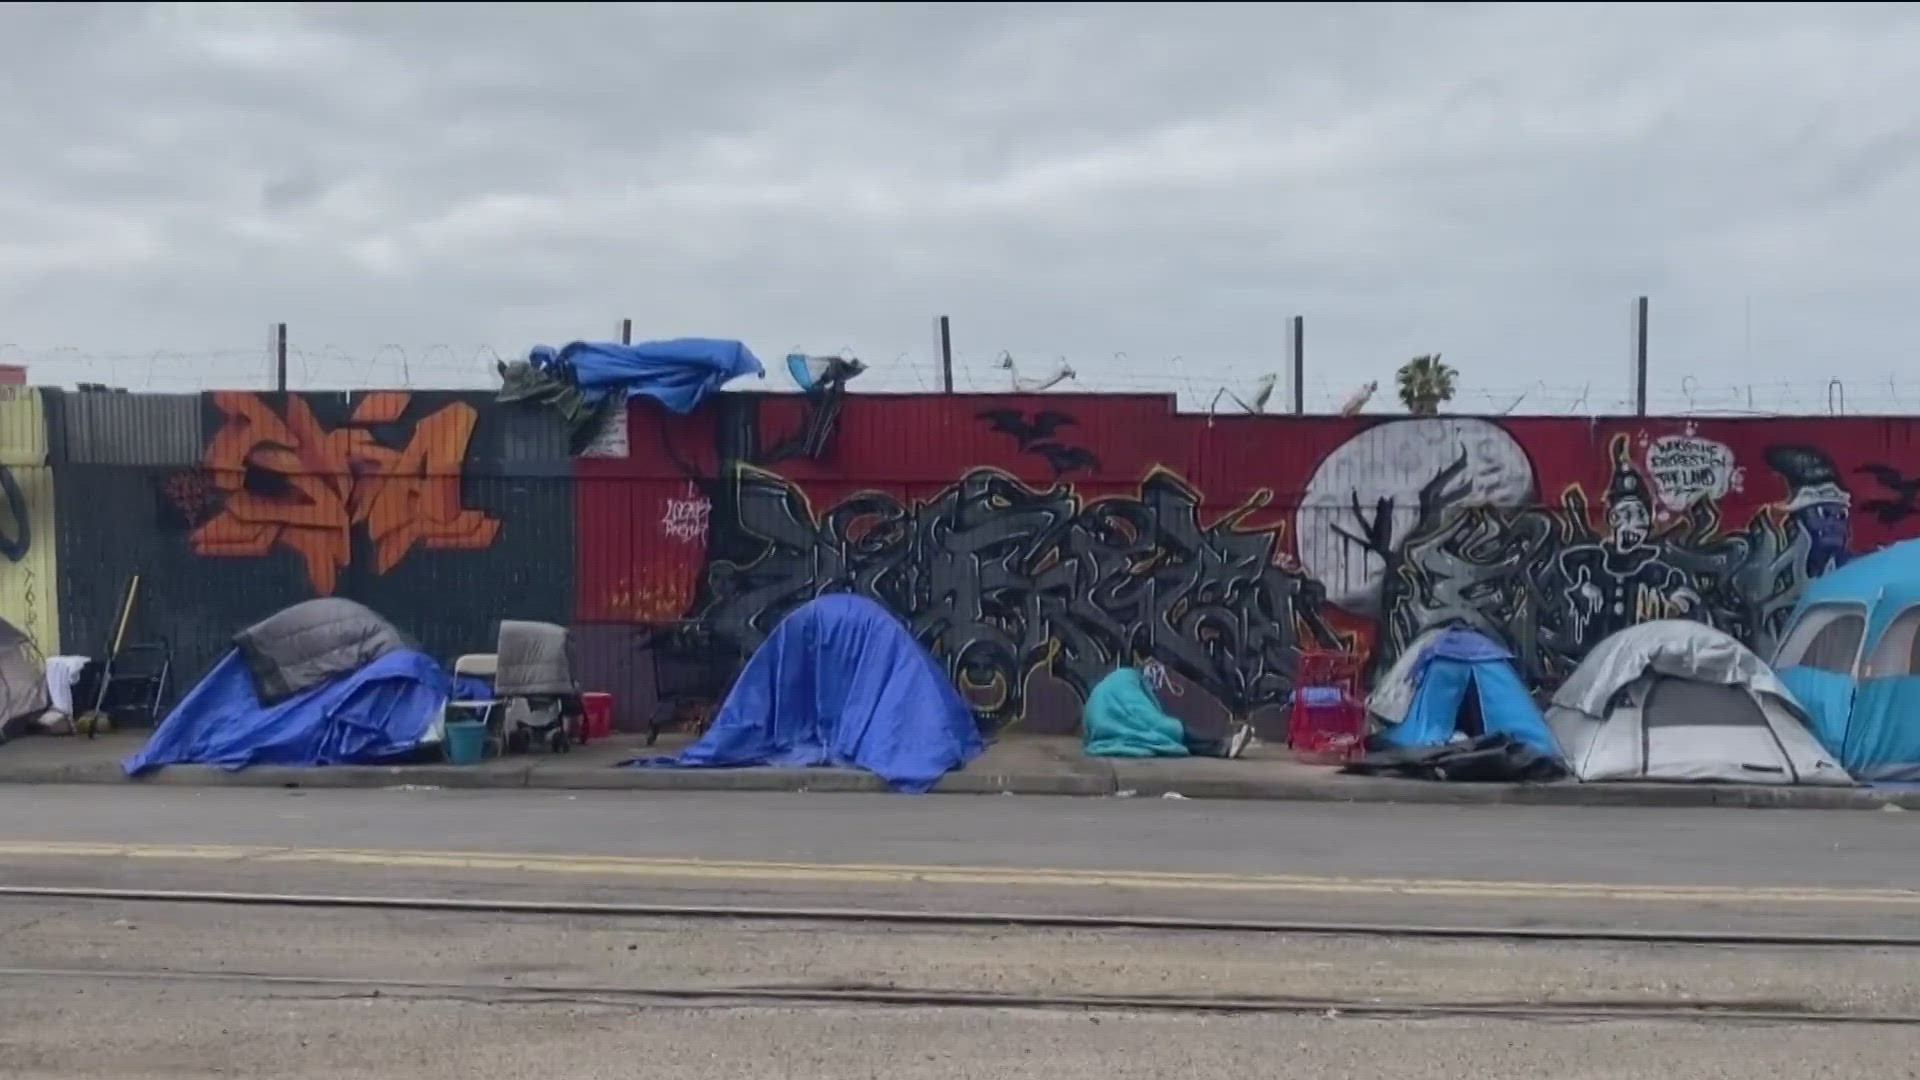 Mayor Gloria is urging the city council to pass the proposed Unsafe Camping Ordinance, which bans homeless encampments in public spaces if shelter beds are available